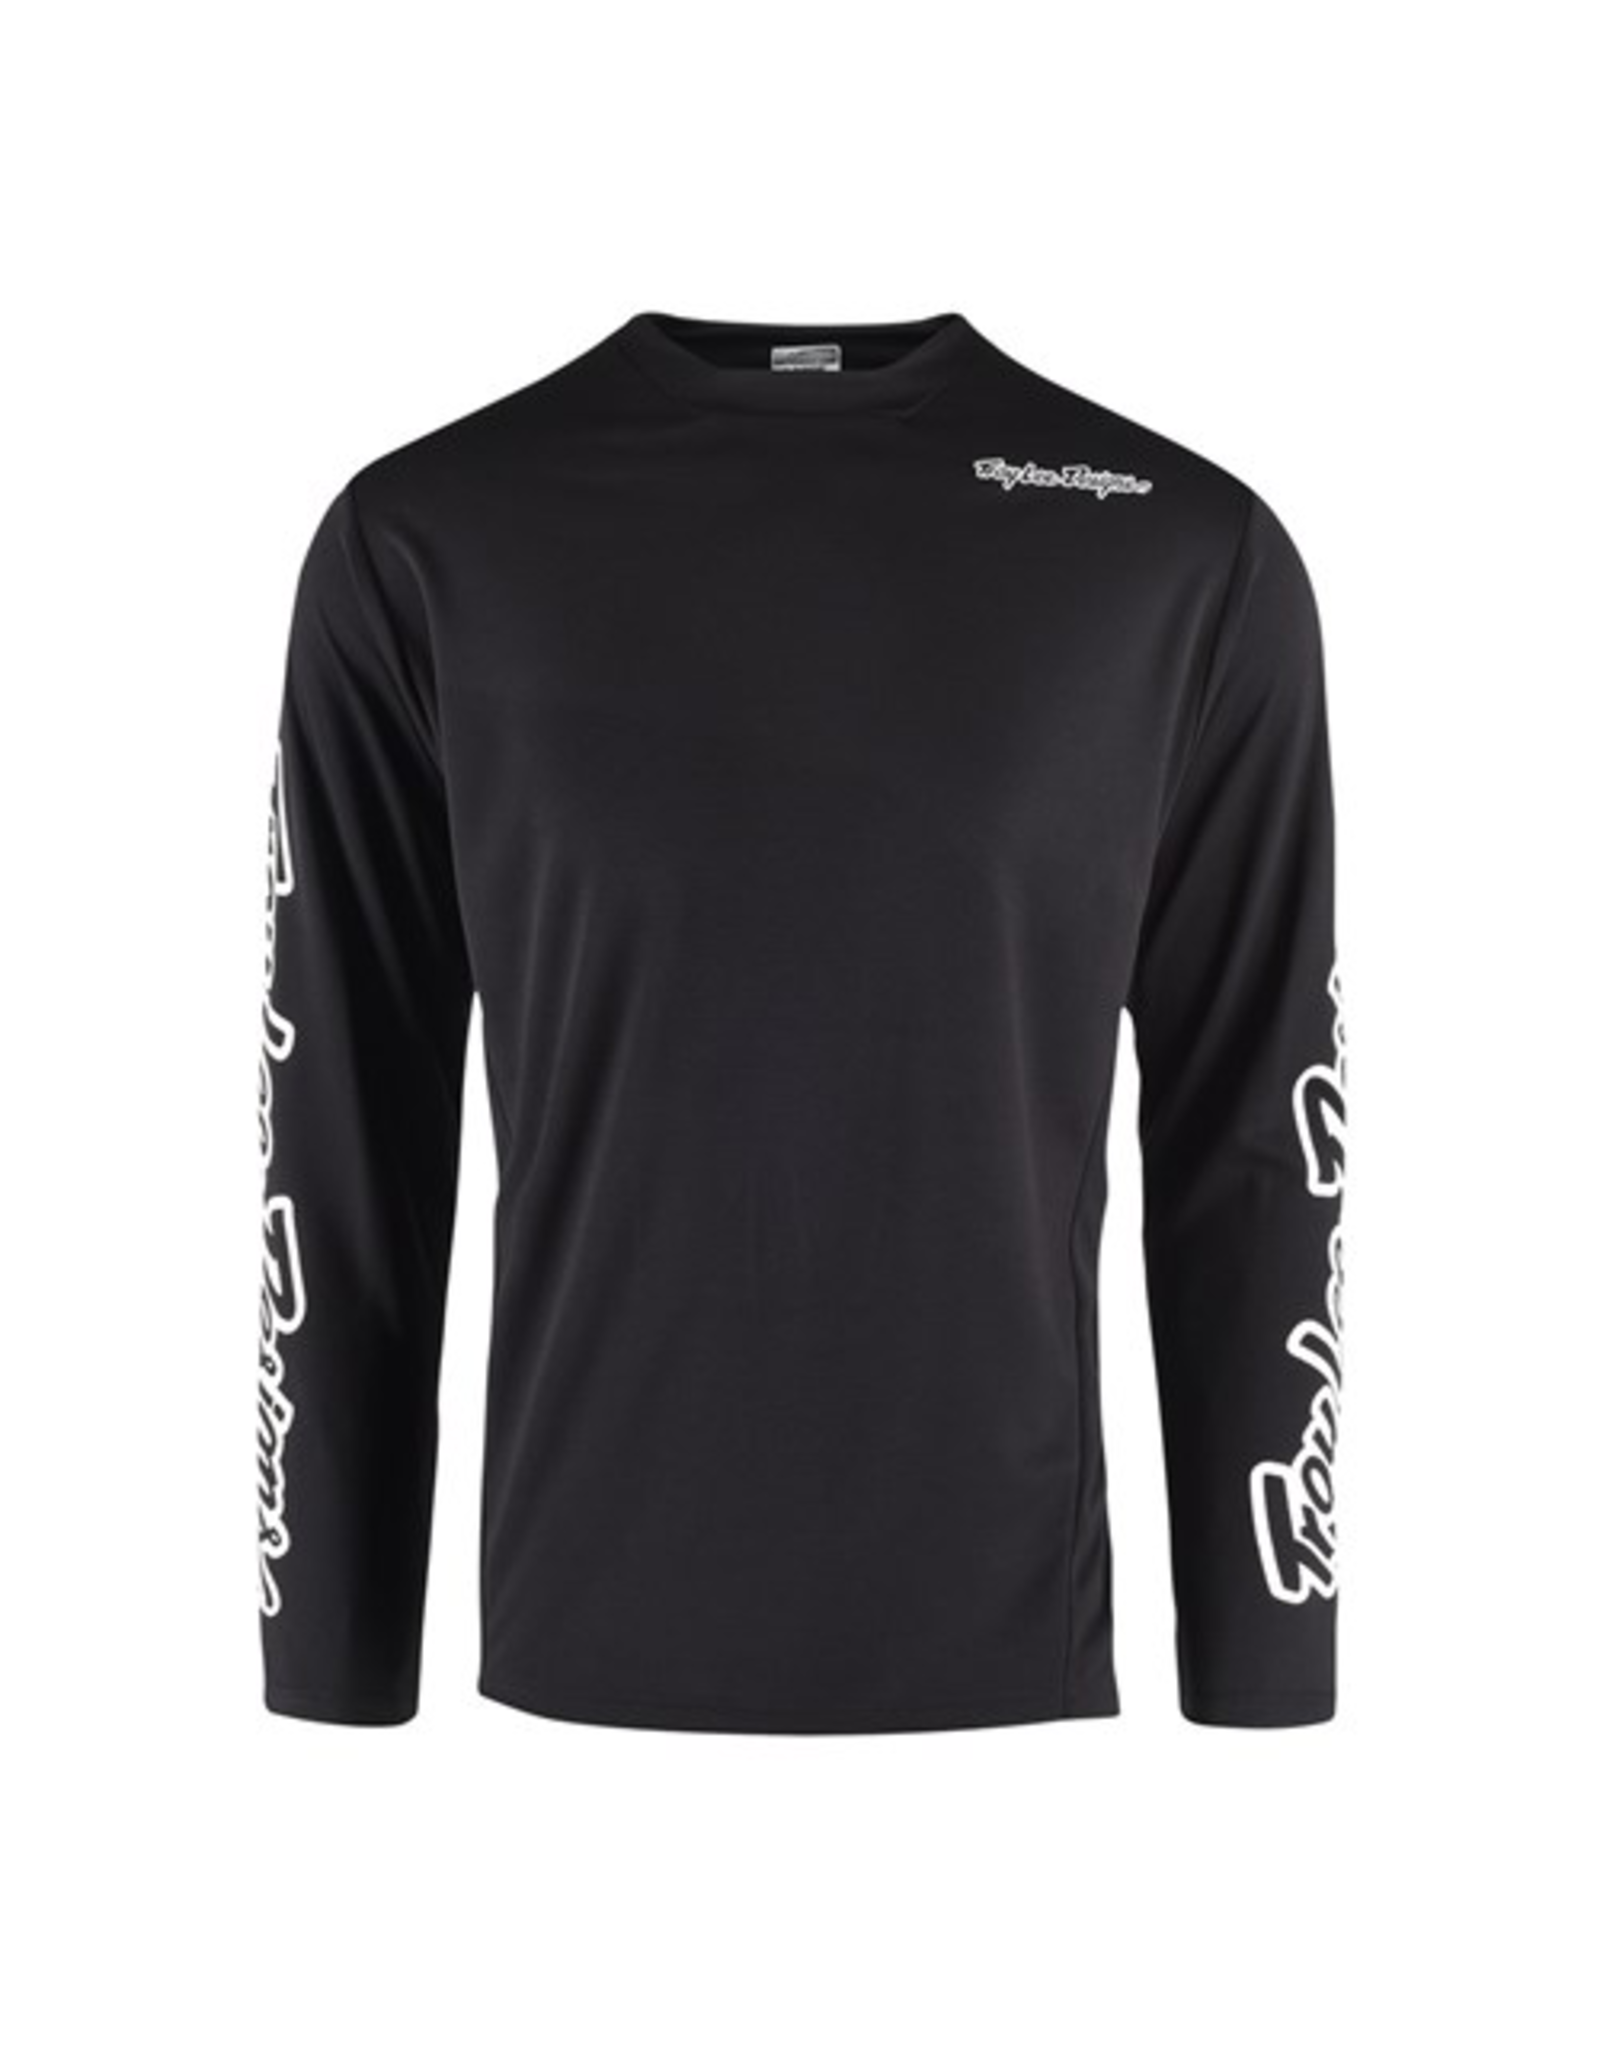 TROY LEE DESIGNS TROY LEE DESIGNS YOUTH SPRINT LS JERSEY